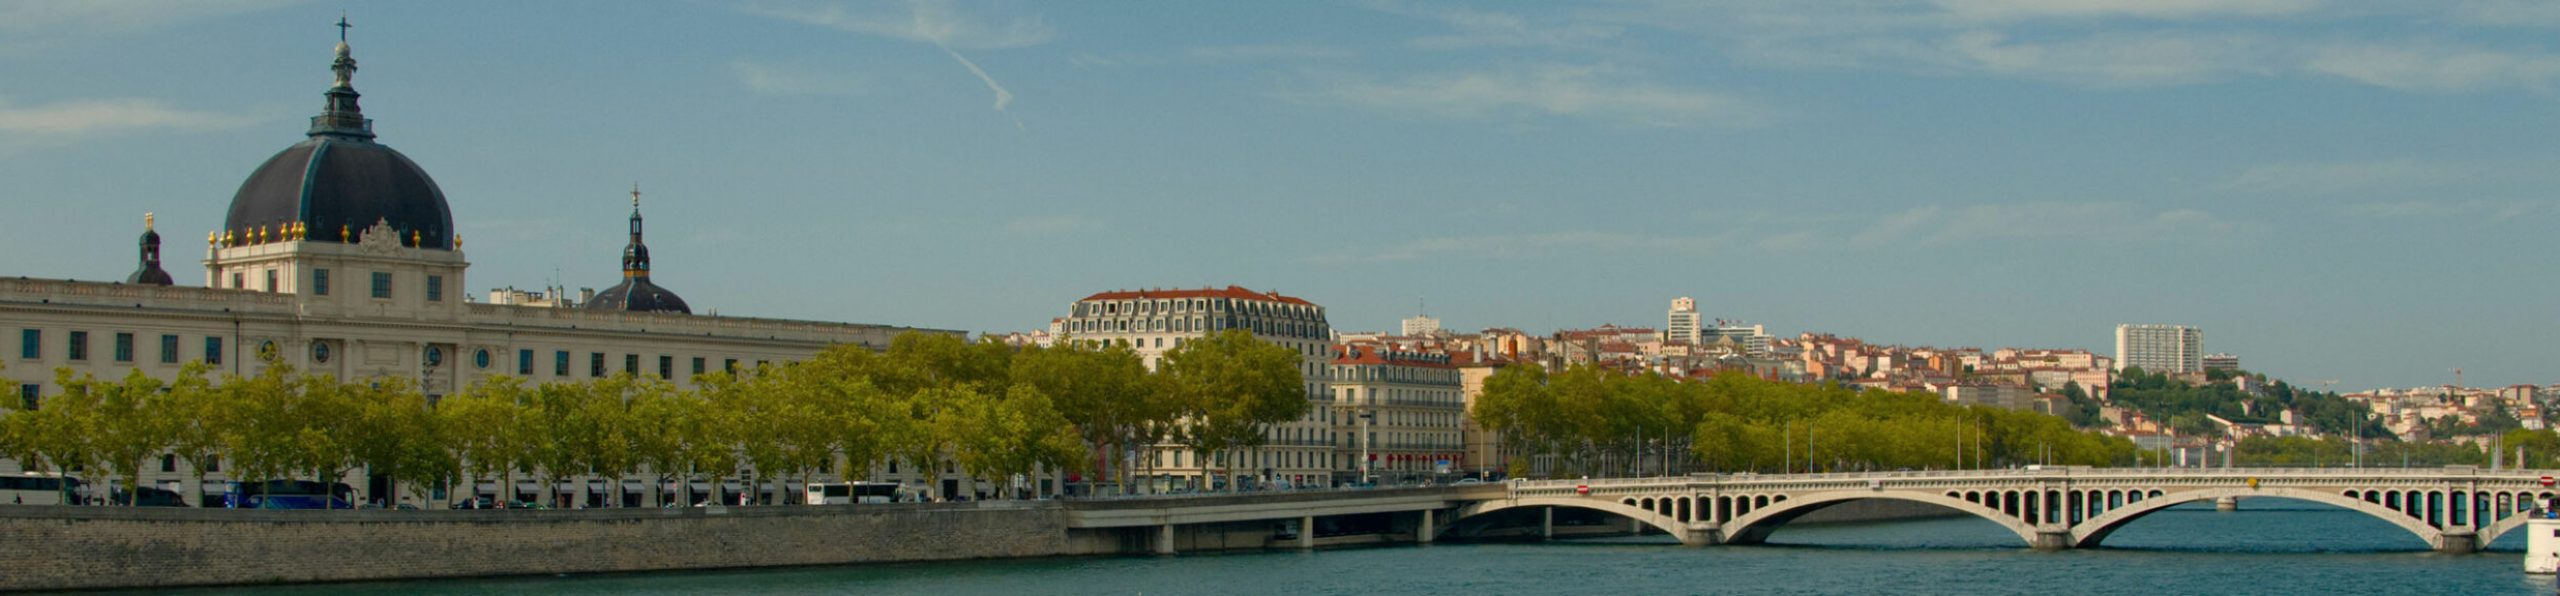 city of lyon by the water with a bridge and old buildings under a clear sky